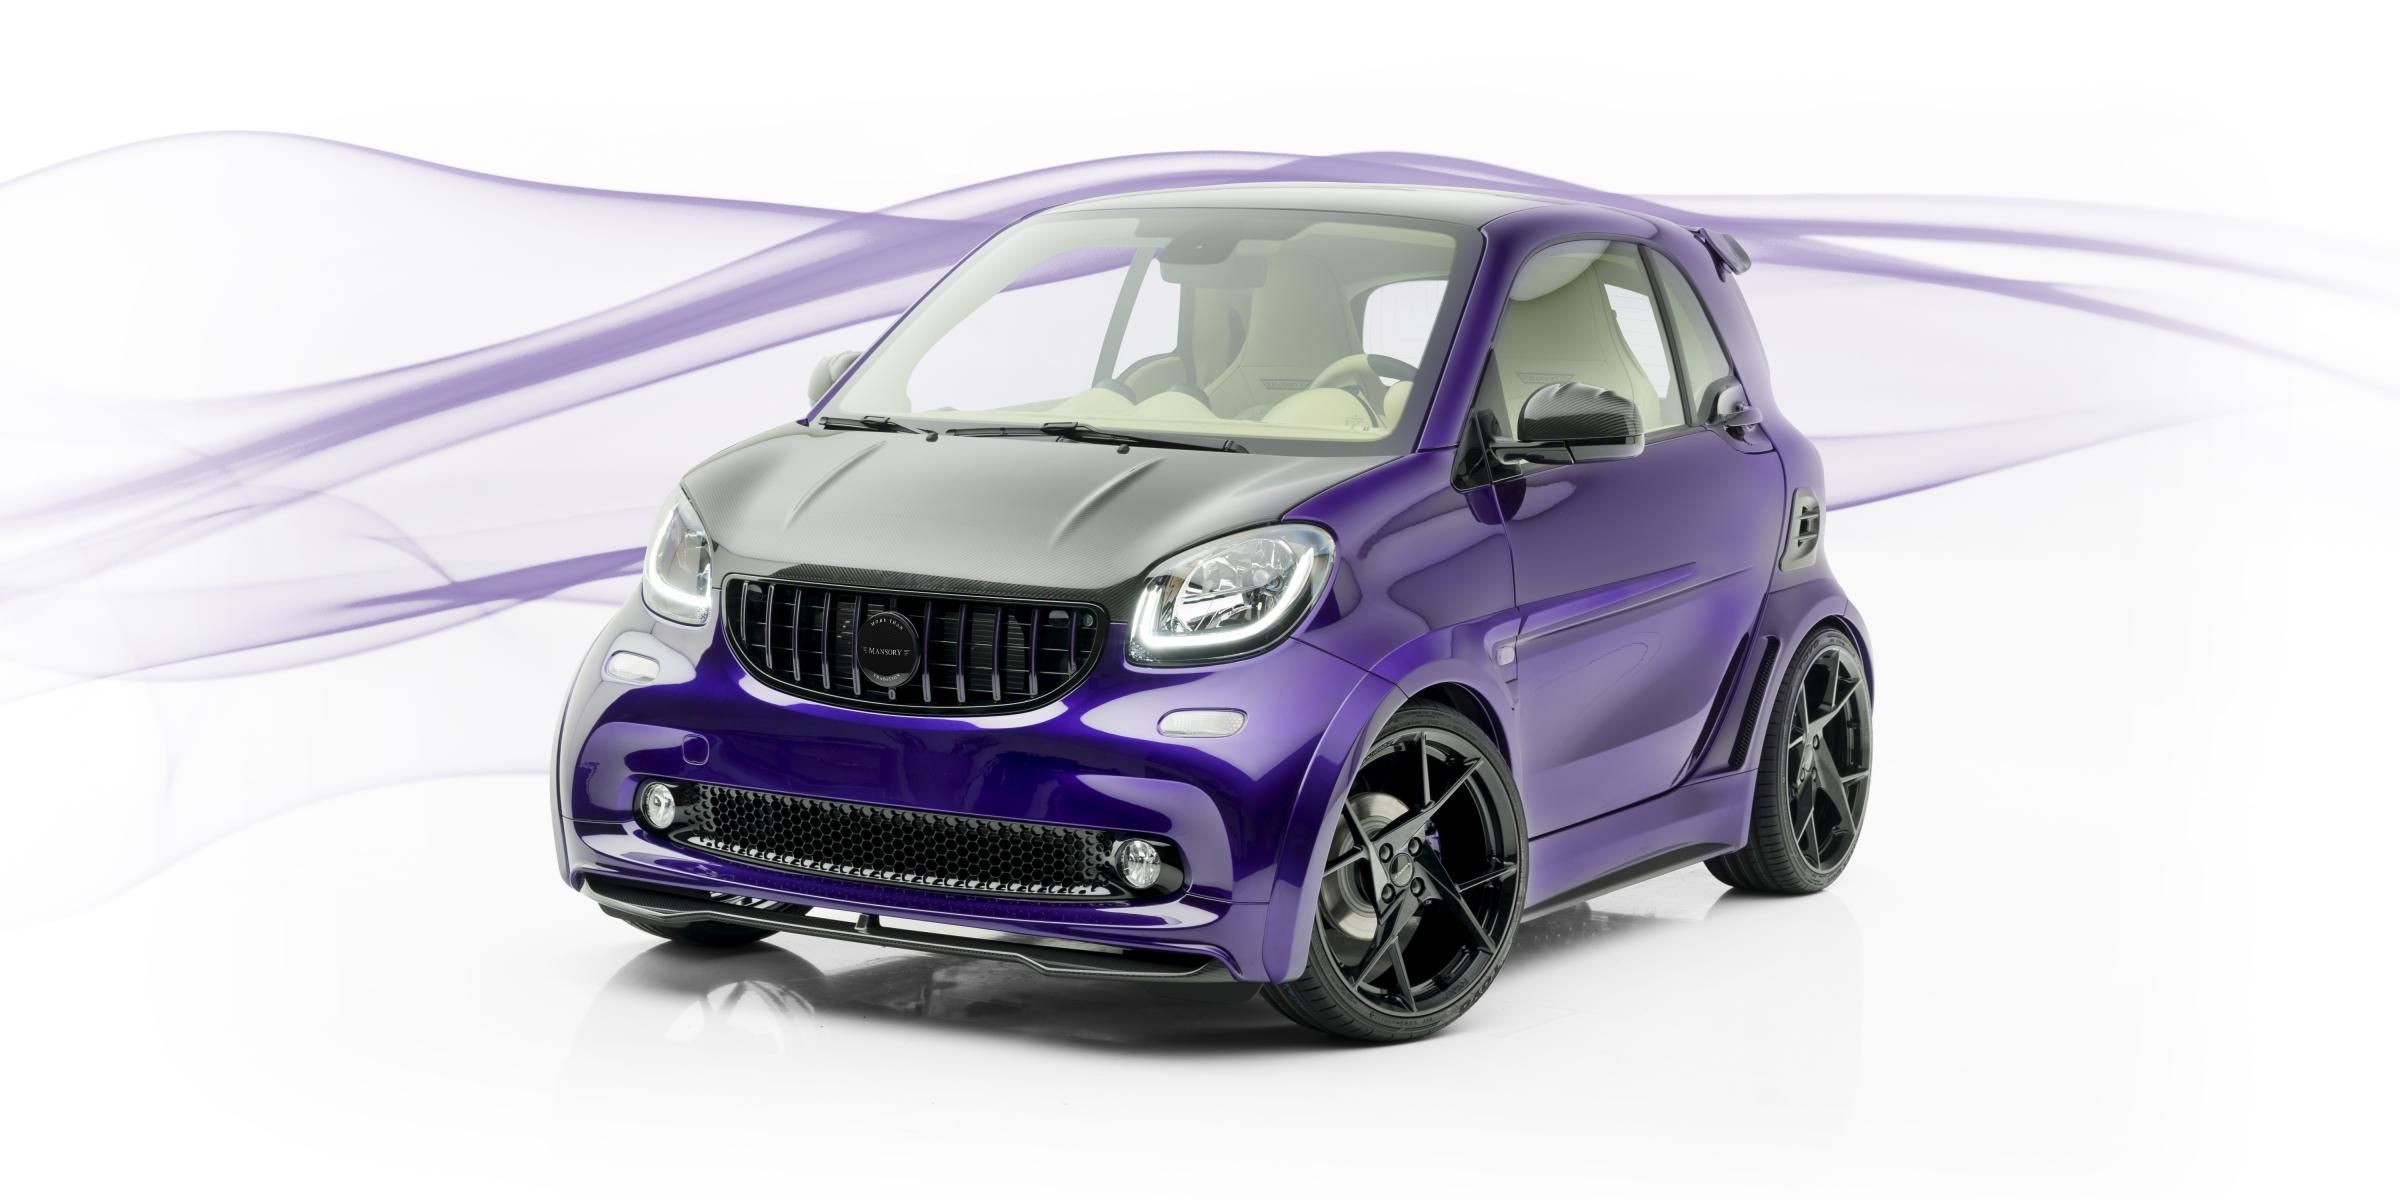 Smart ForTwo Mansory